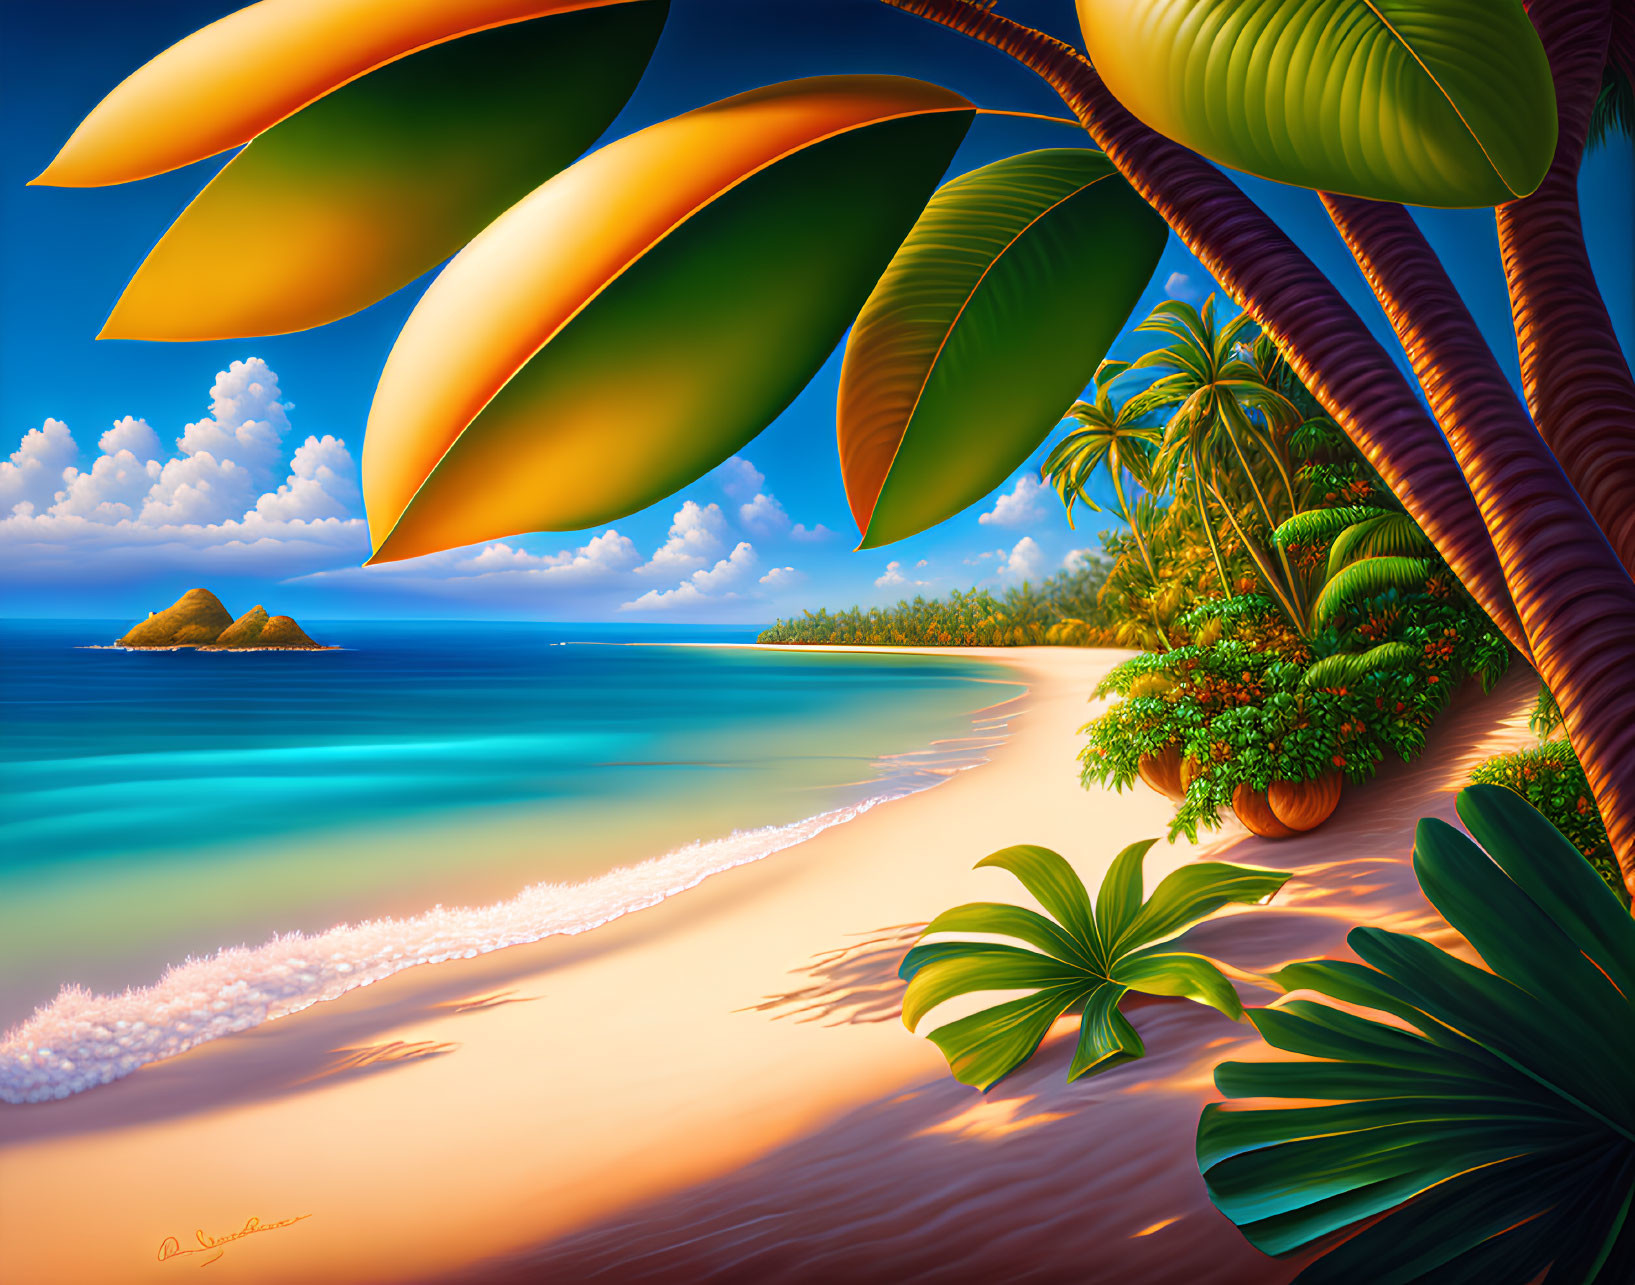 Vibrant beach scene with clear skies, green foliage, golden sand, and turquoise sea